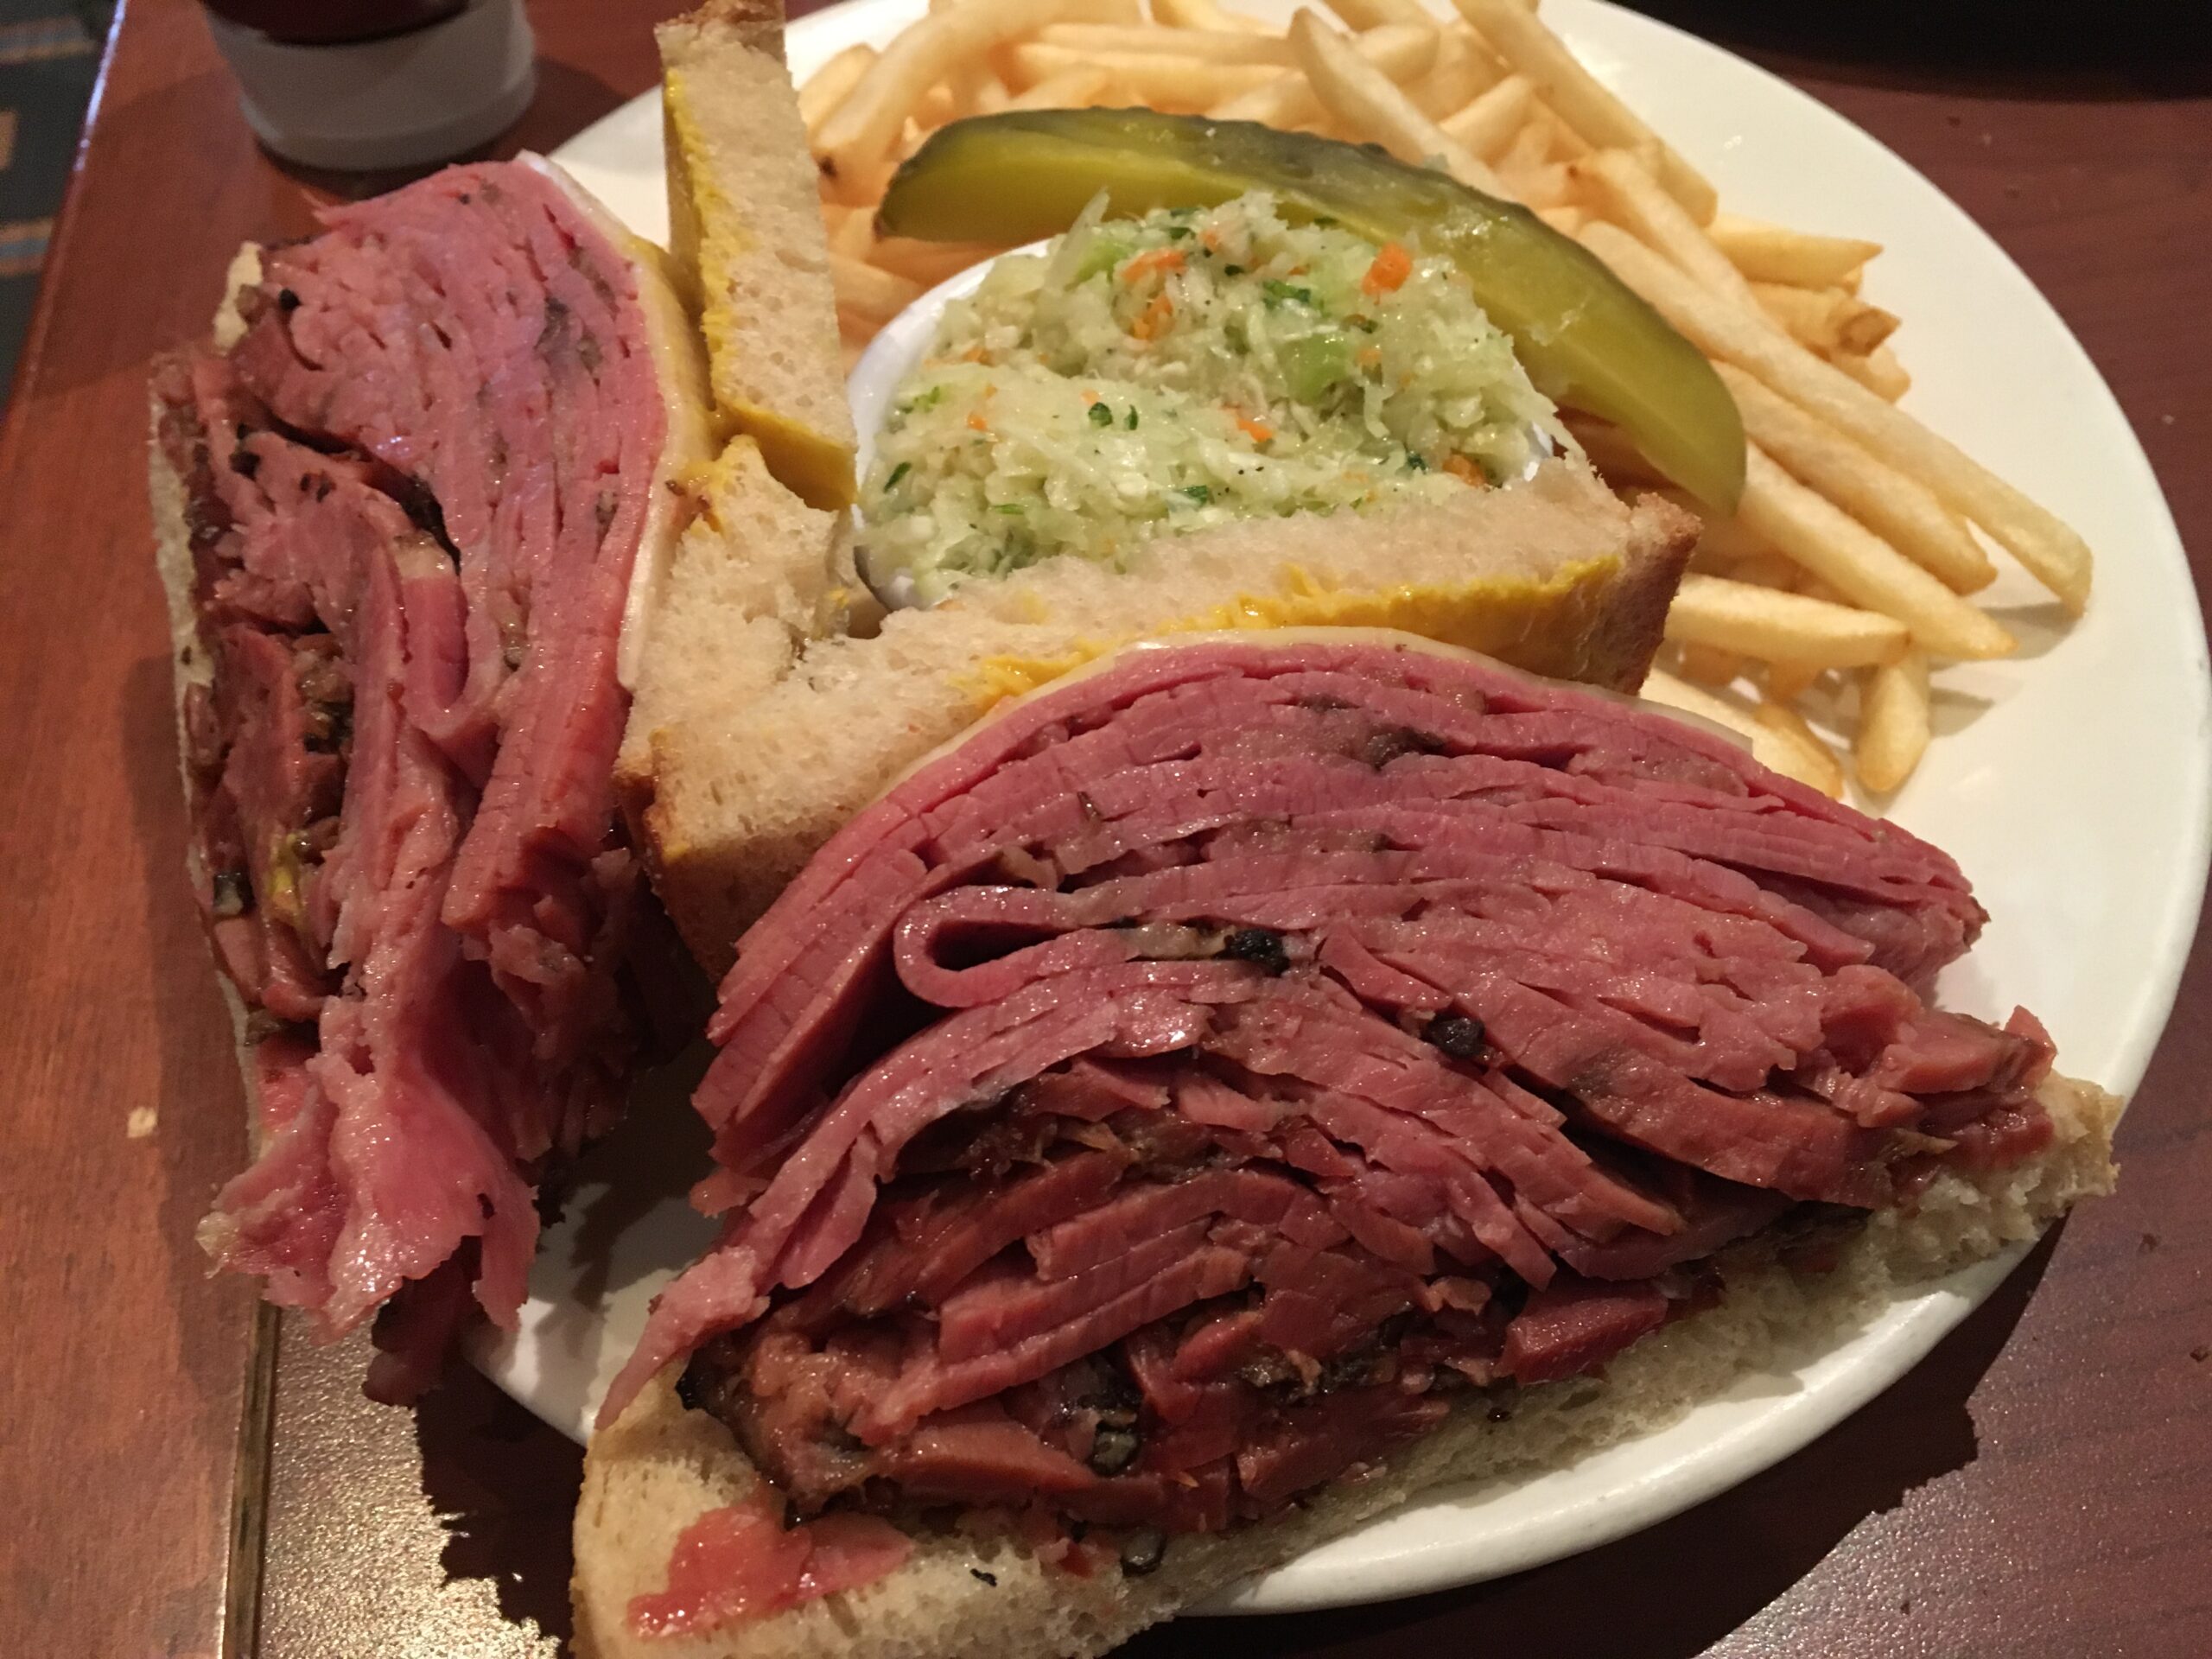 You are currently viewing Oh my! Montreal smoked meat at Reuben’s Deli & Steakhouse